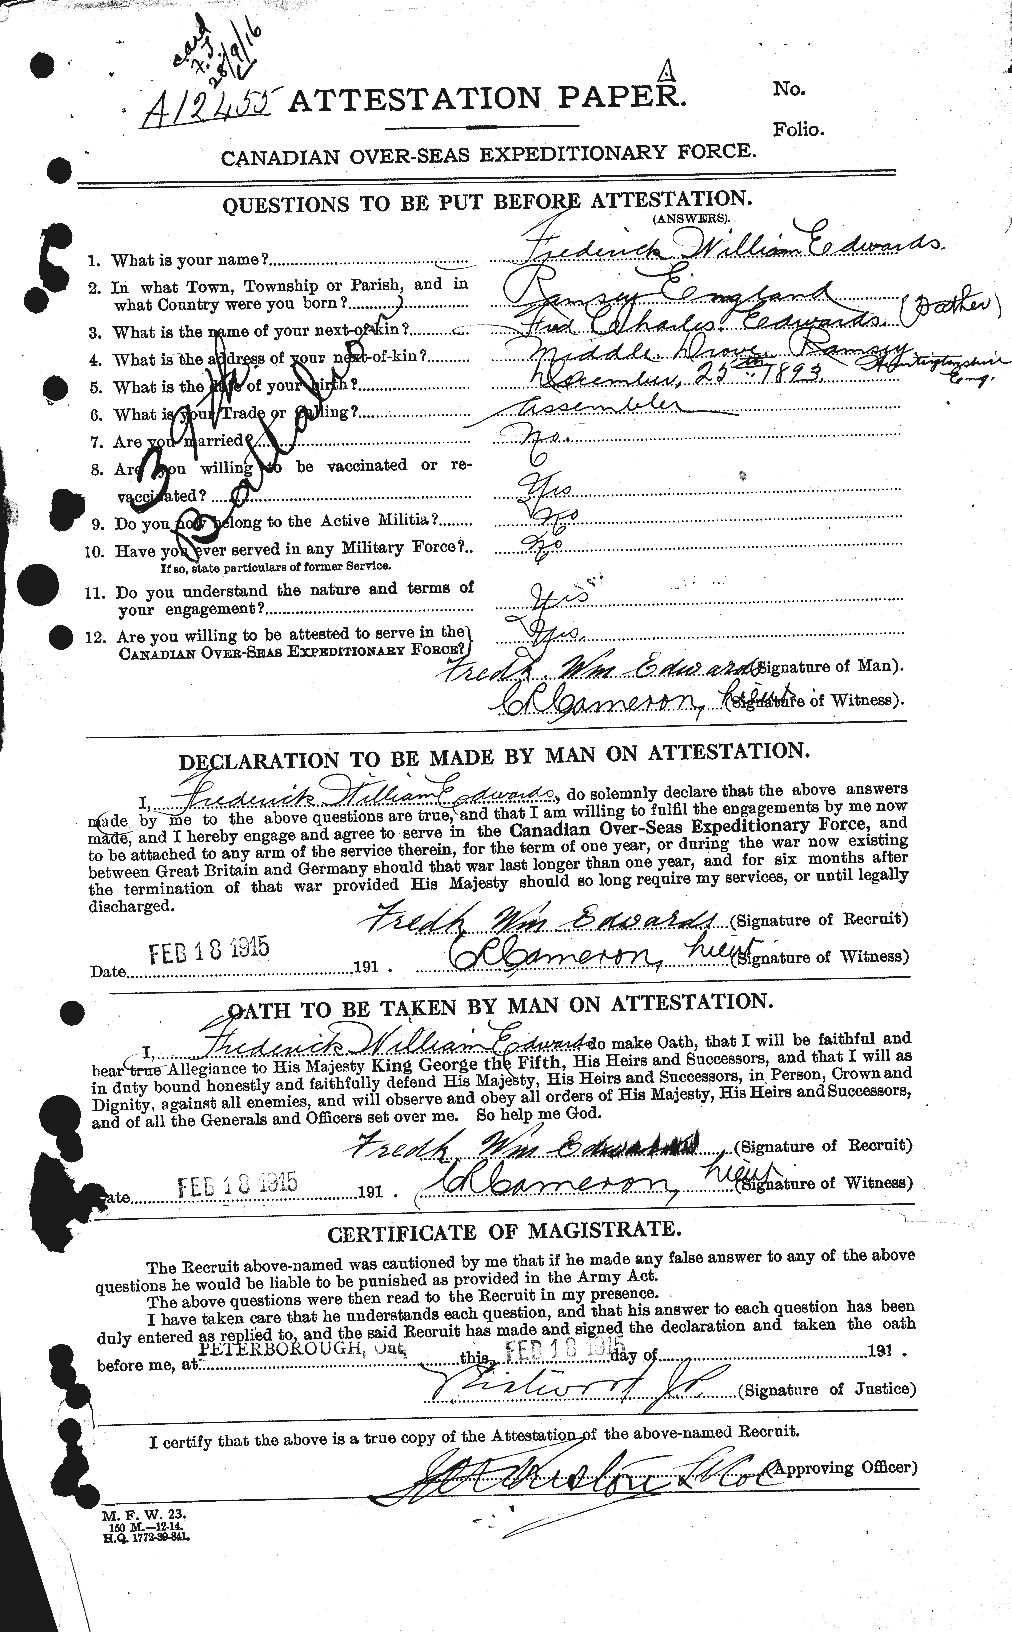 Personnel Records of the First World War - CEF 309083a